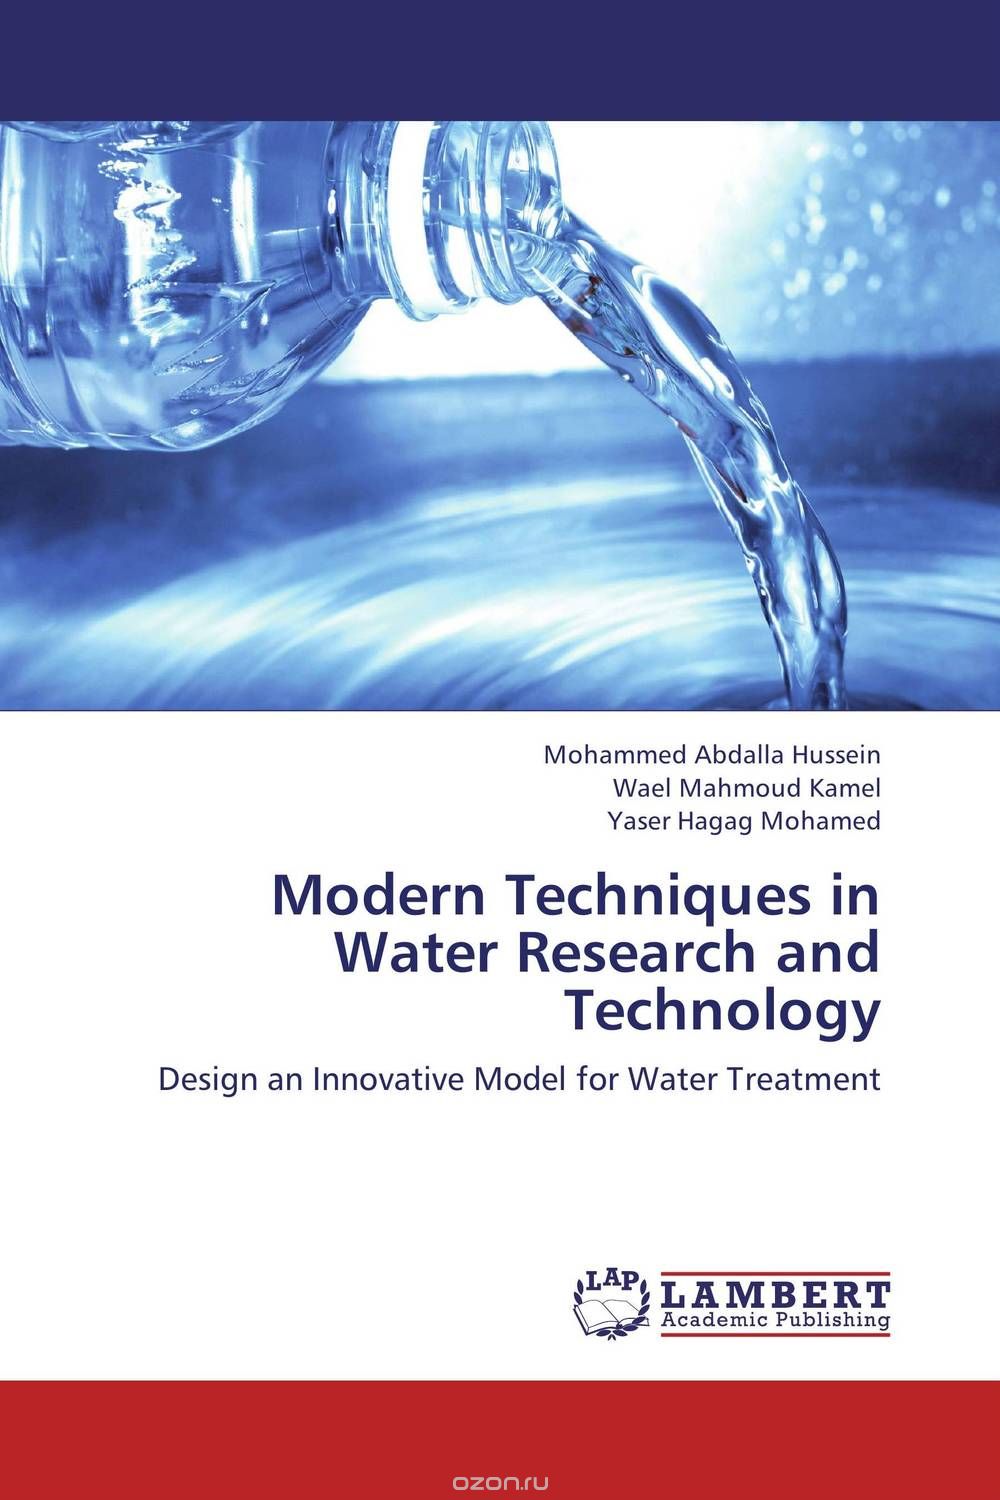 Скачать книгу "Modern Techniques in Water Research and Technology"